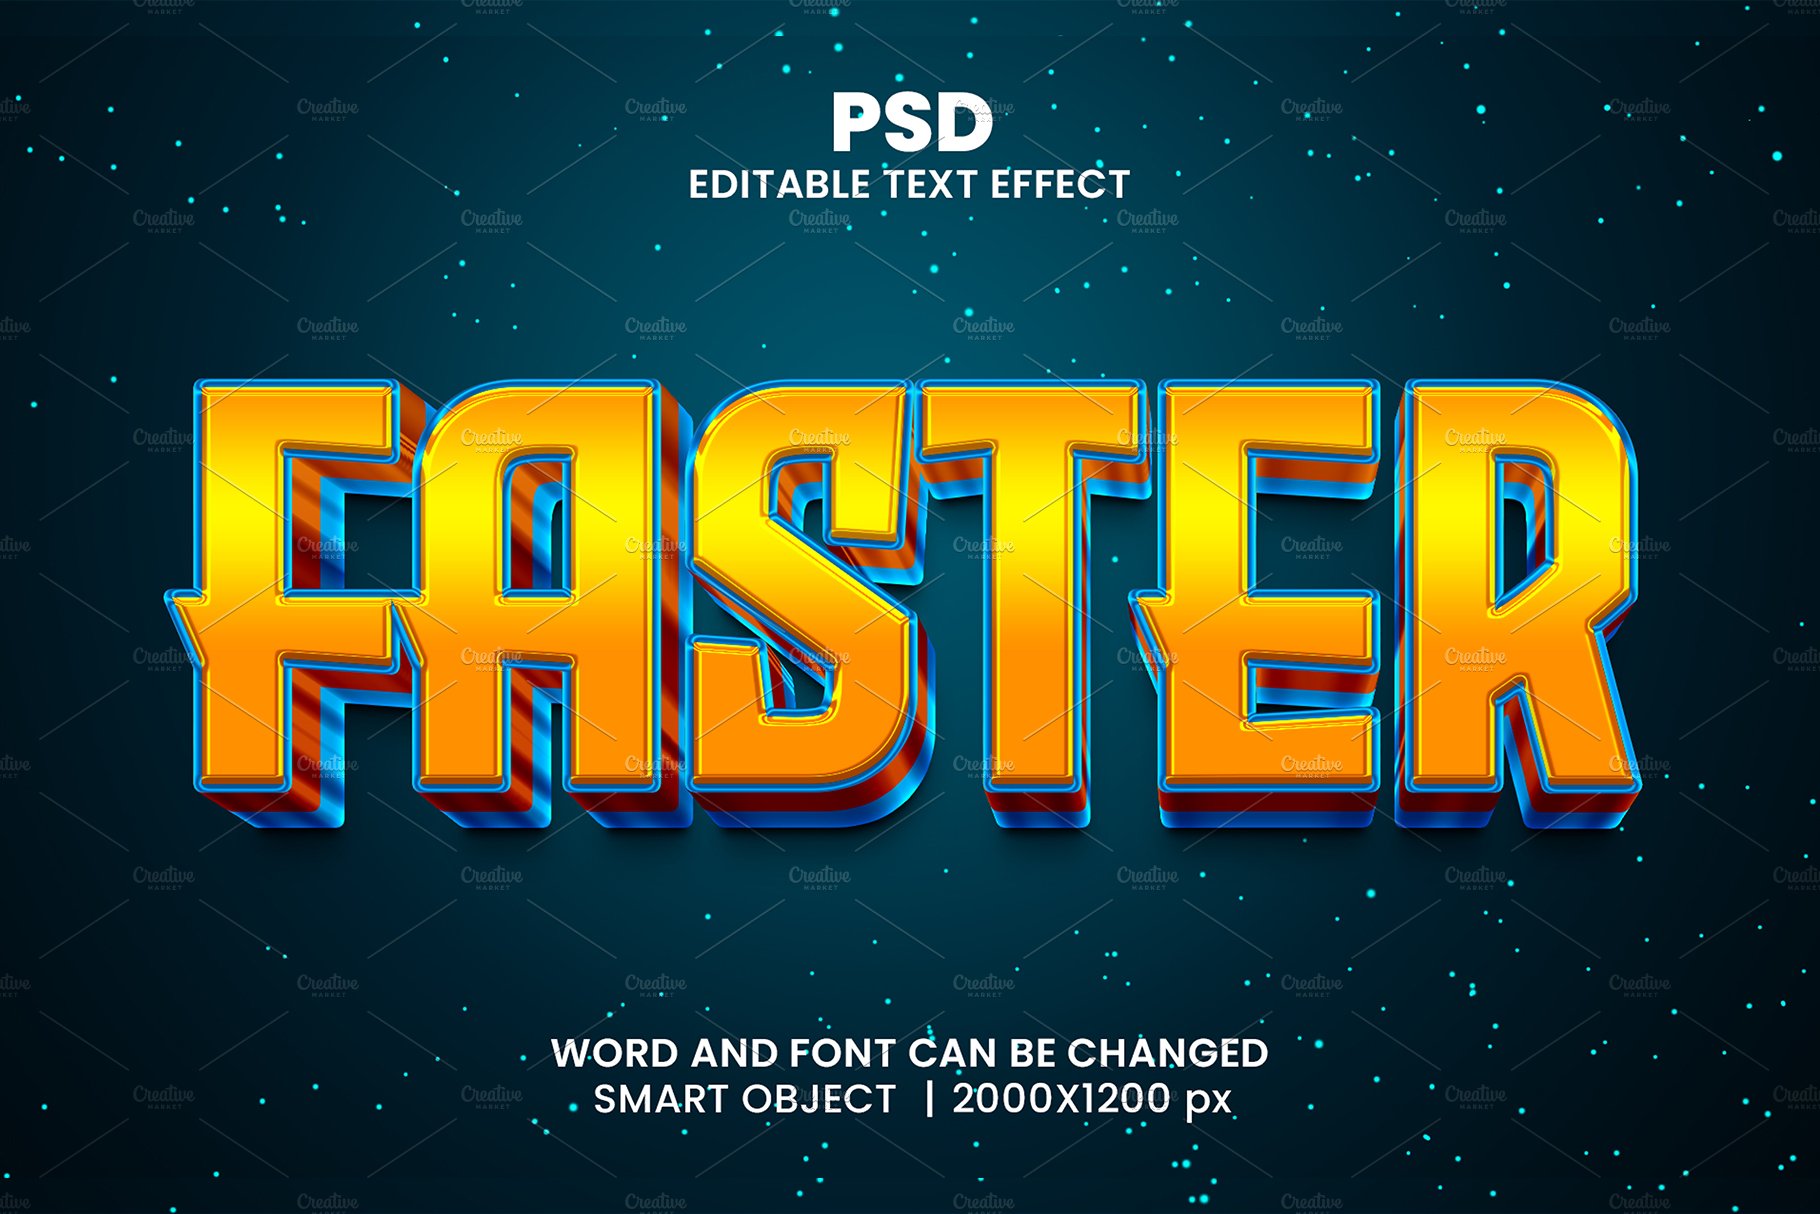 Faster 3d Editable Psd Text Effectcover image.